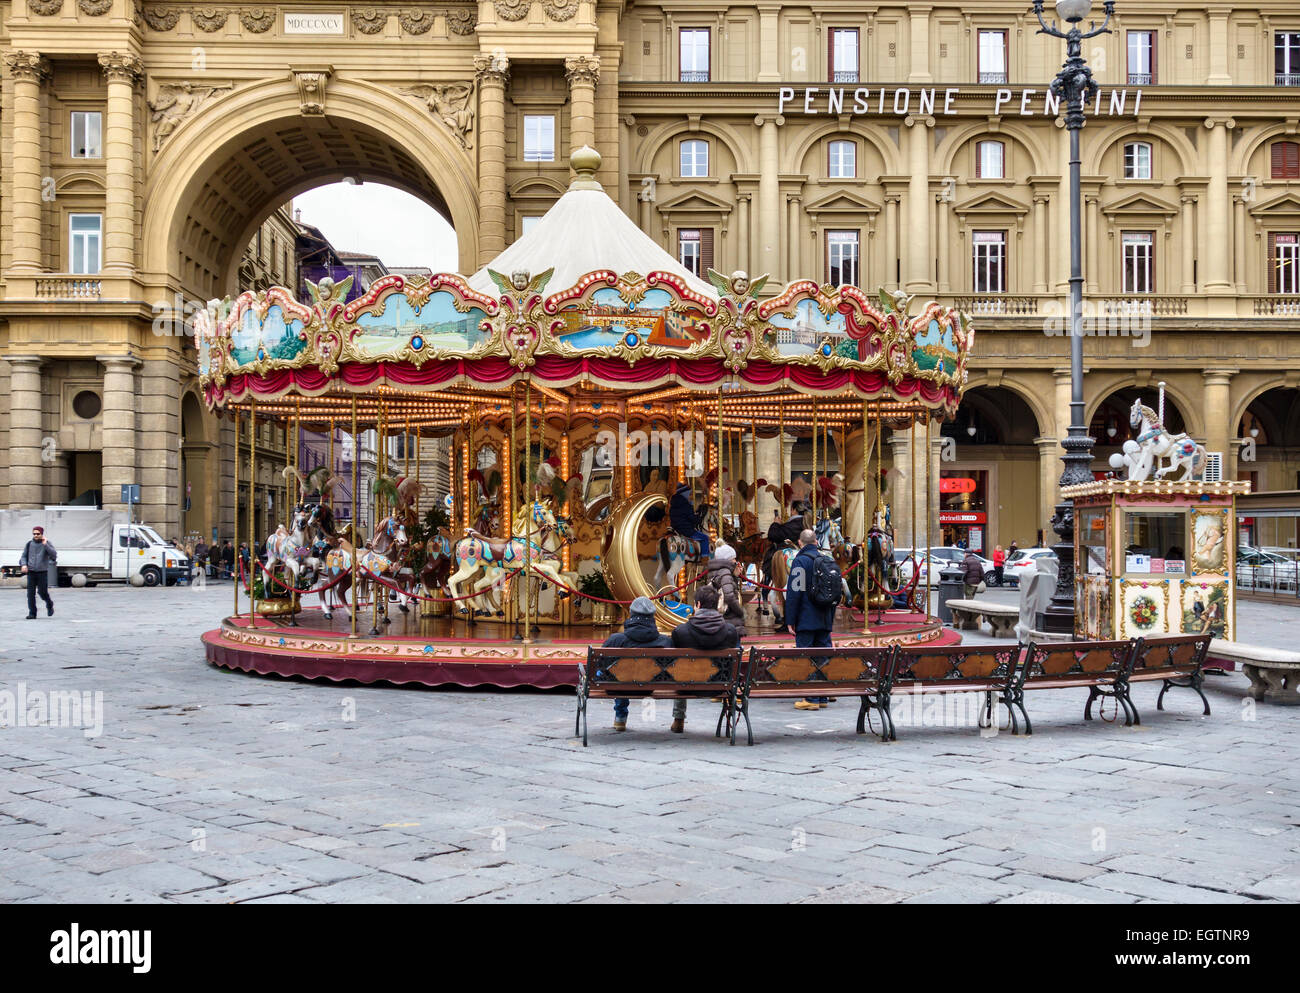 Florence, Tuscany, Italy. A merry-go-round (carousel) in Piazza della Repubblica in the centre of the city Stock Photo